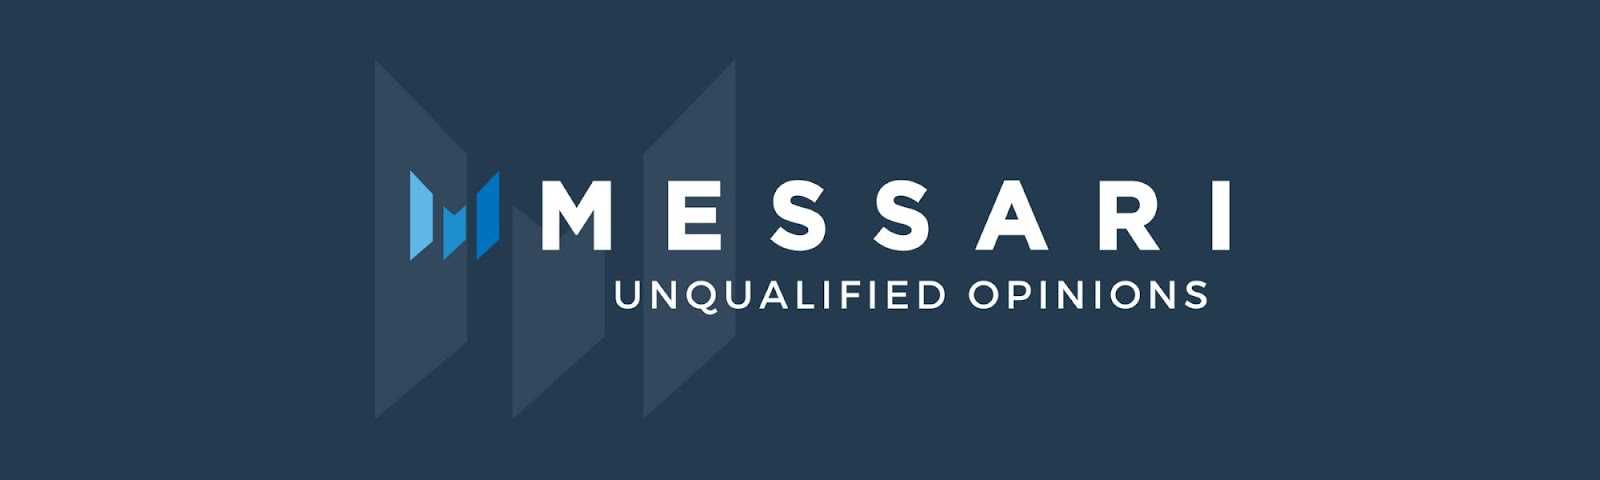 Messari Unqualified Opinions, crypto, newsletters